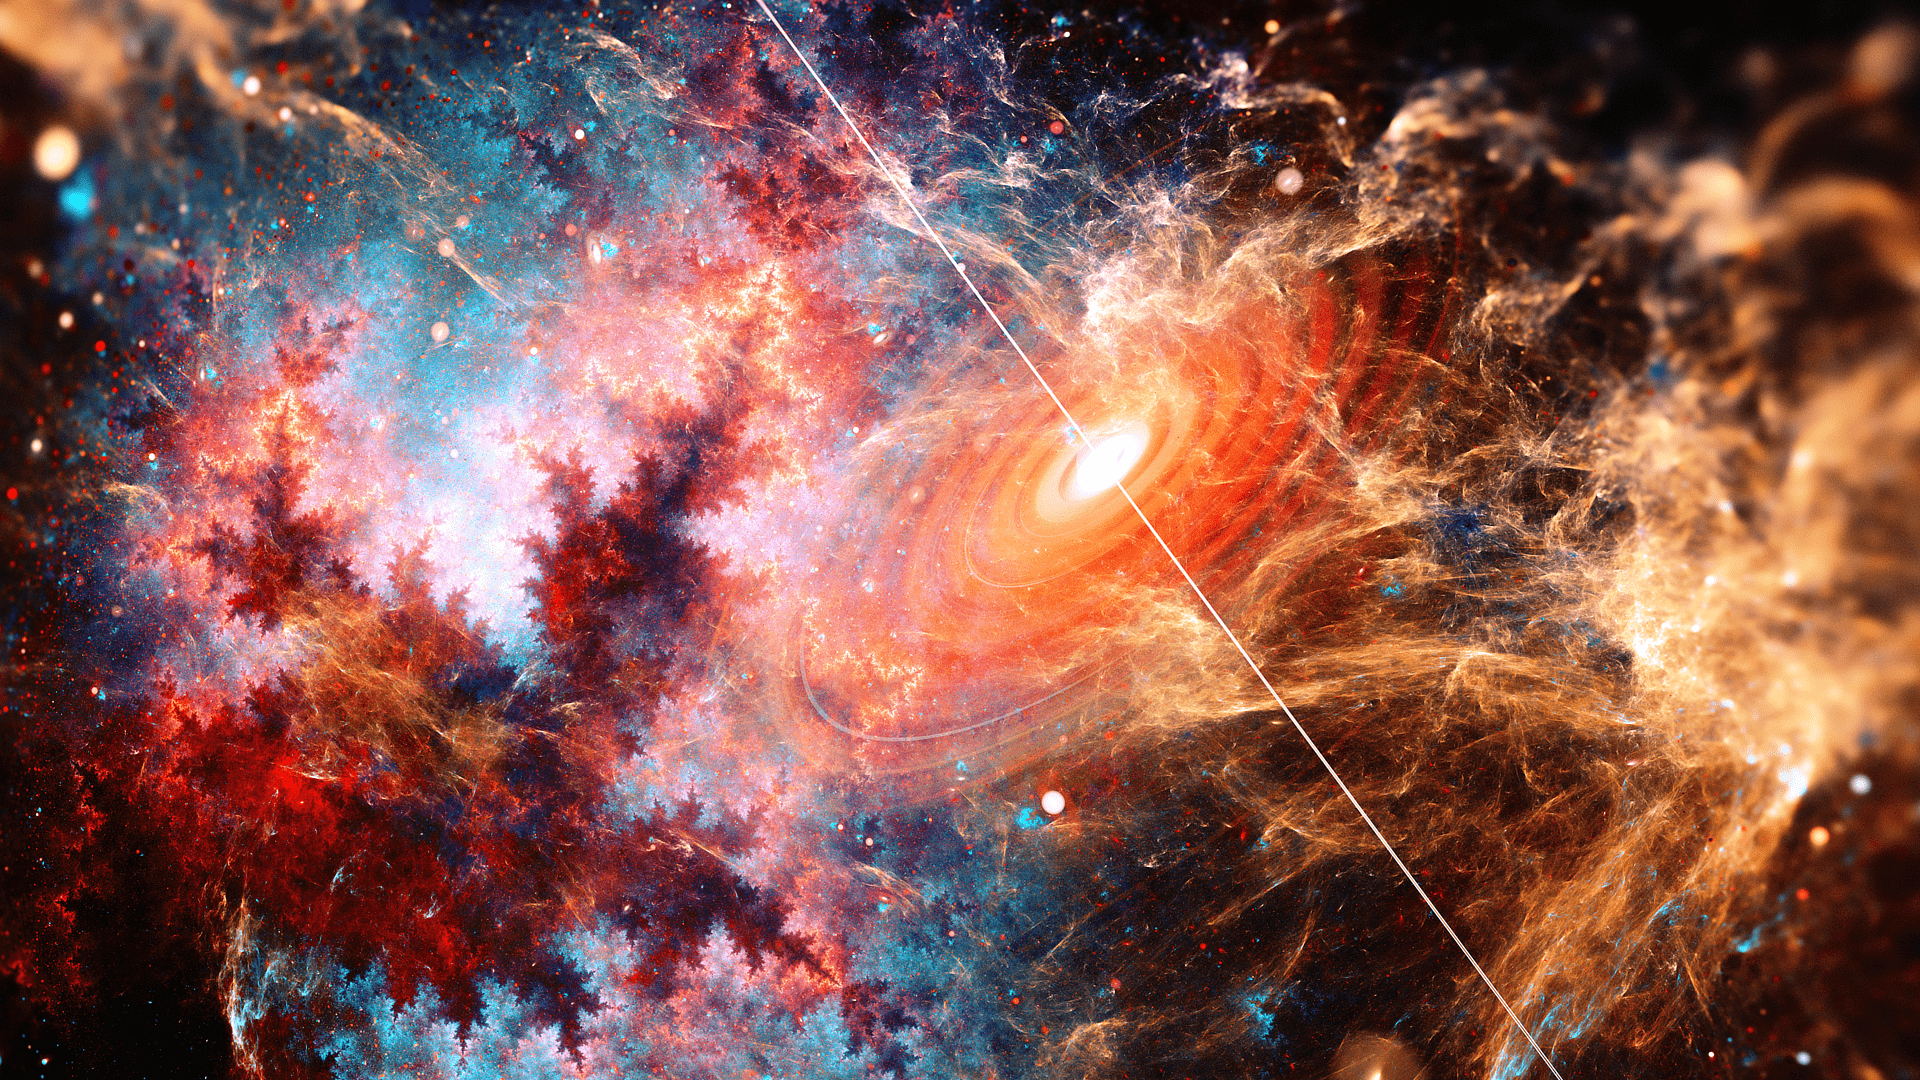 Artistic 4K Space Wallpapers